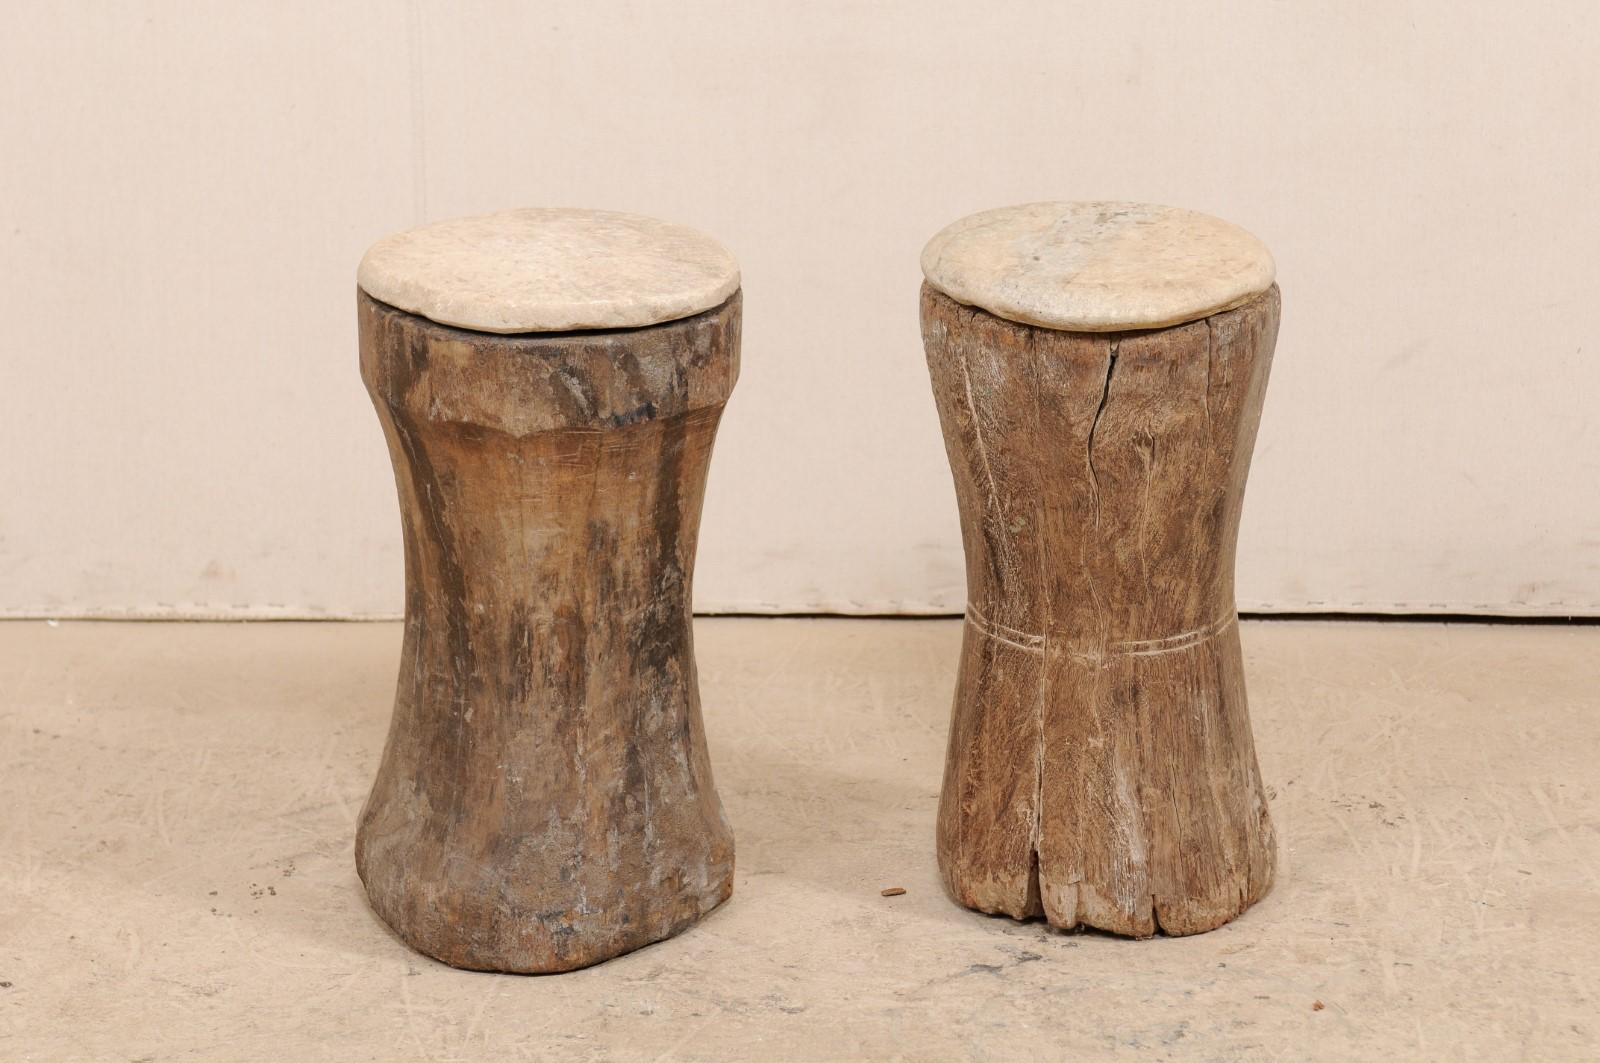 Indian Pair of 19th Century Rustic Wood Mortar Side Tables with Antique Stone Tops